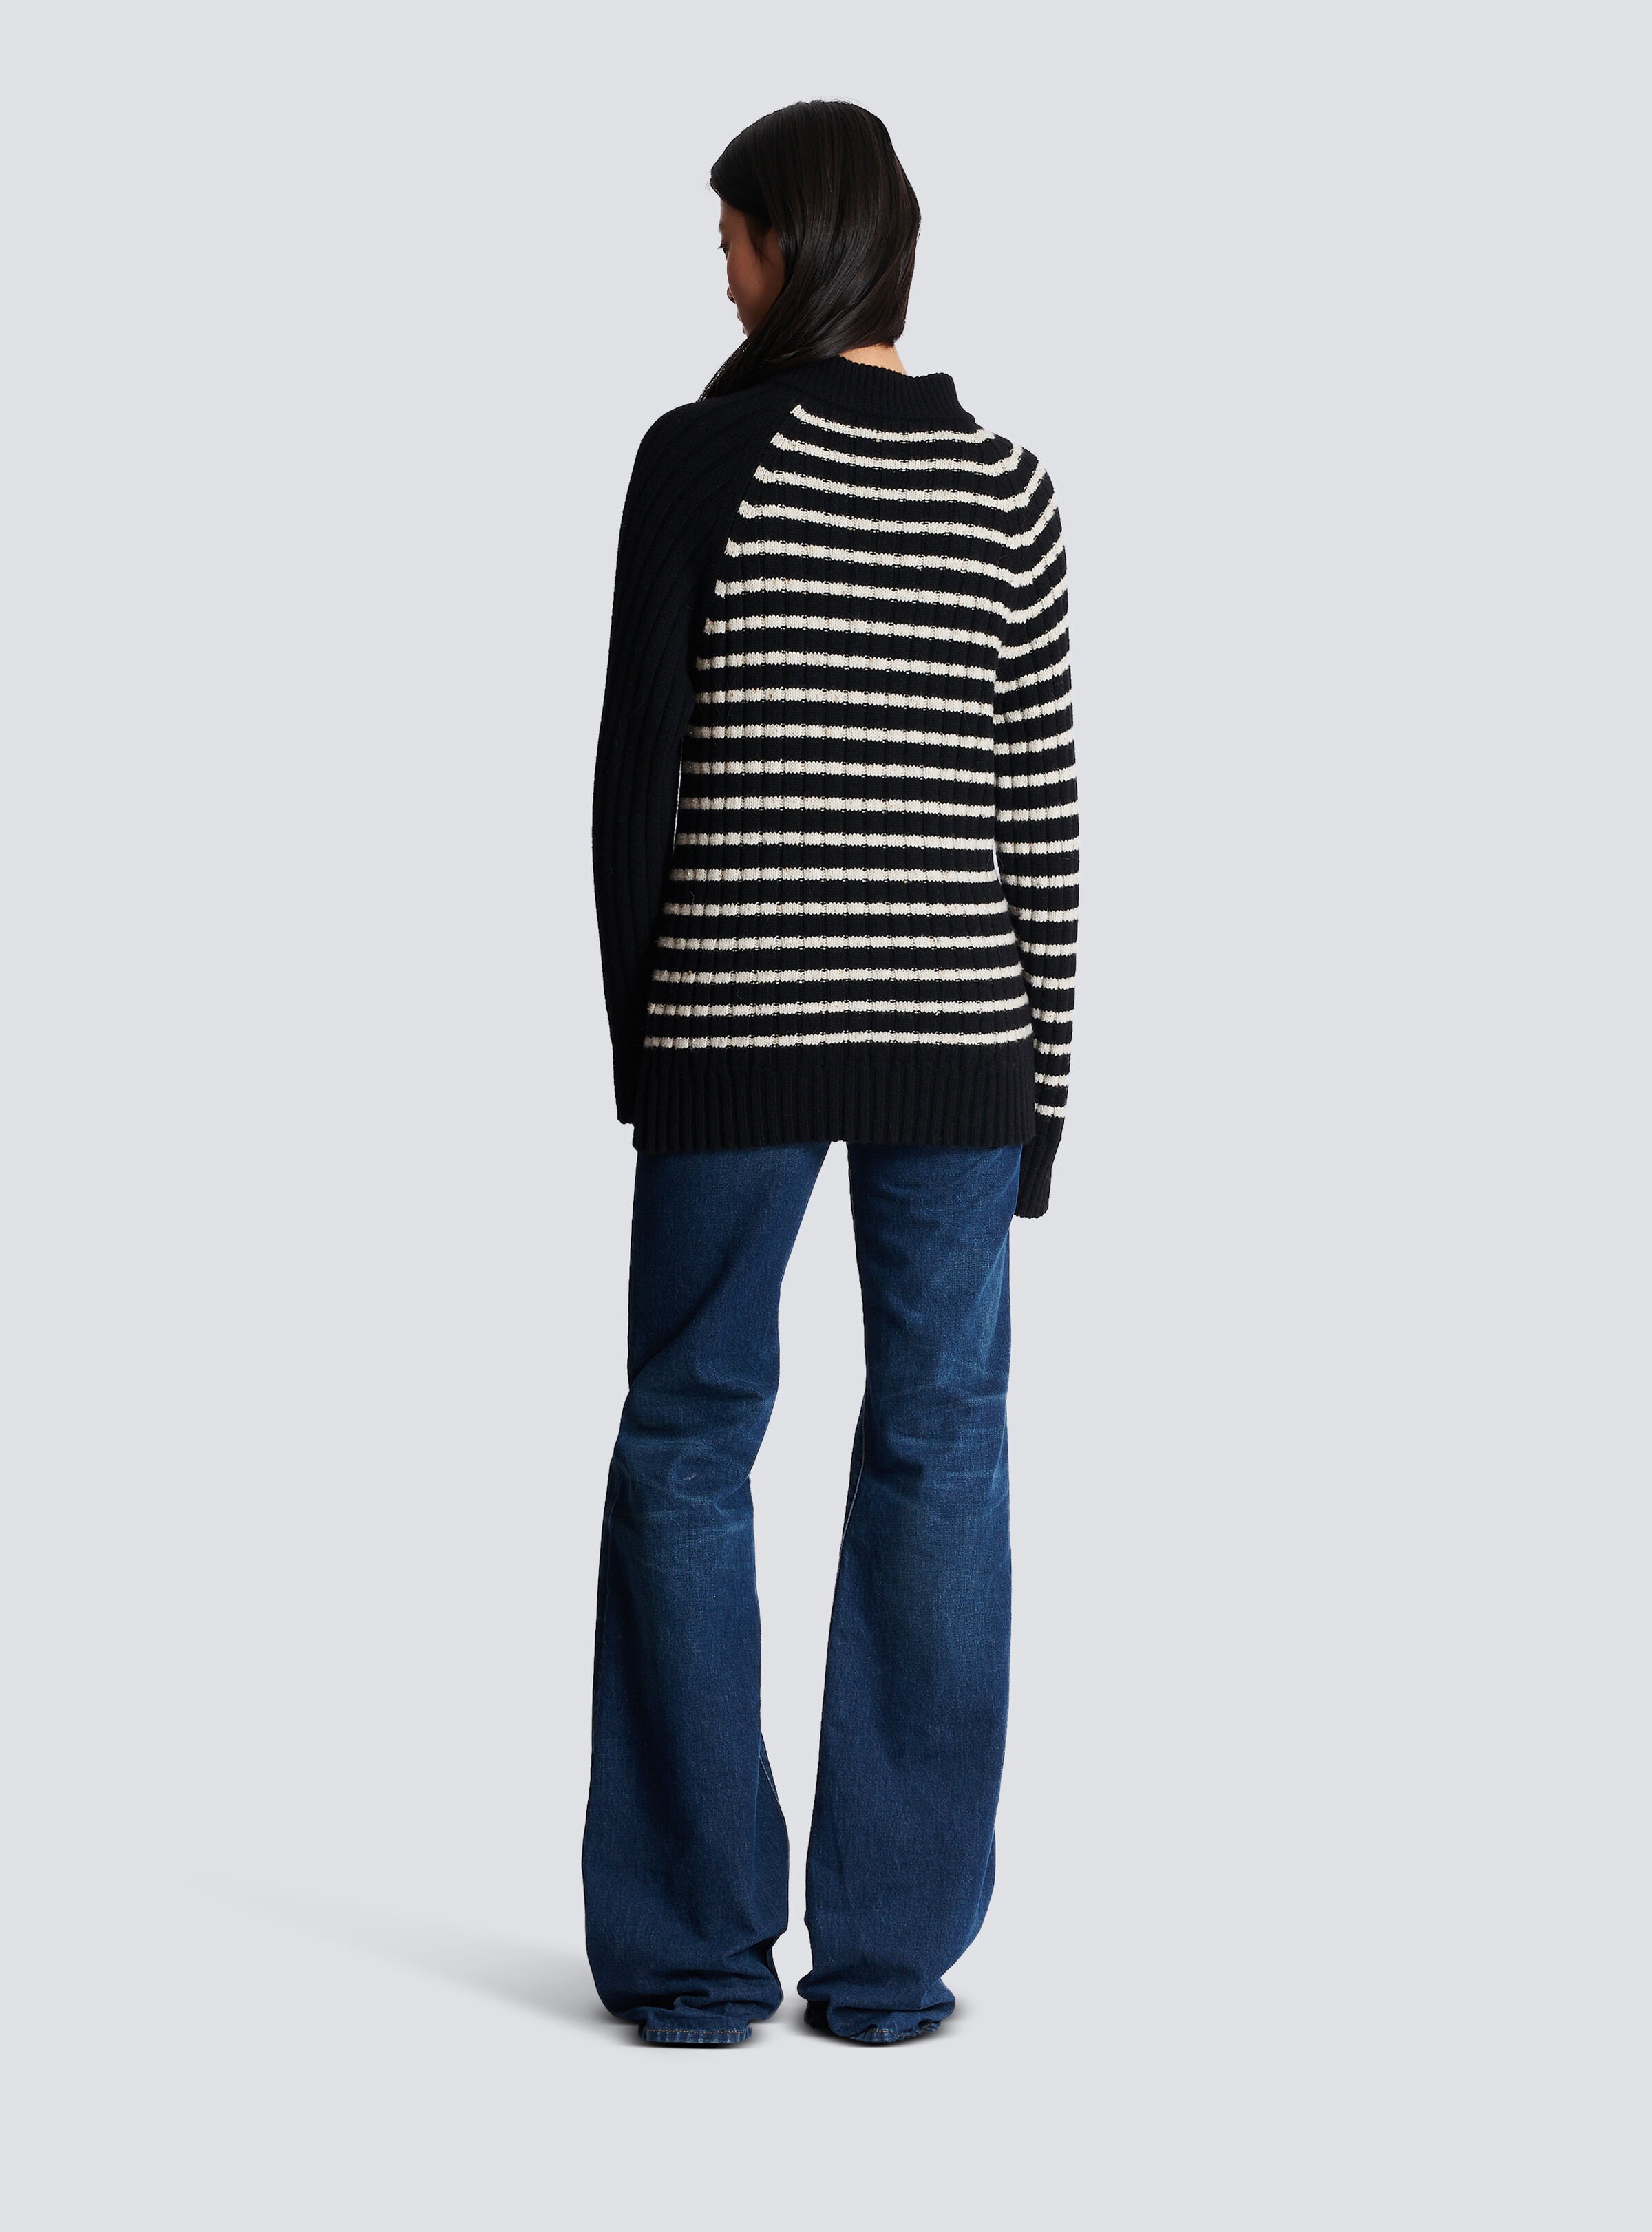 Striped jumper with golden buttons - 7